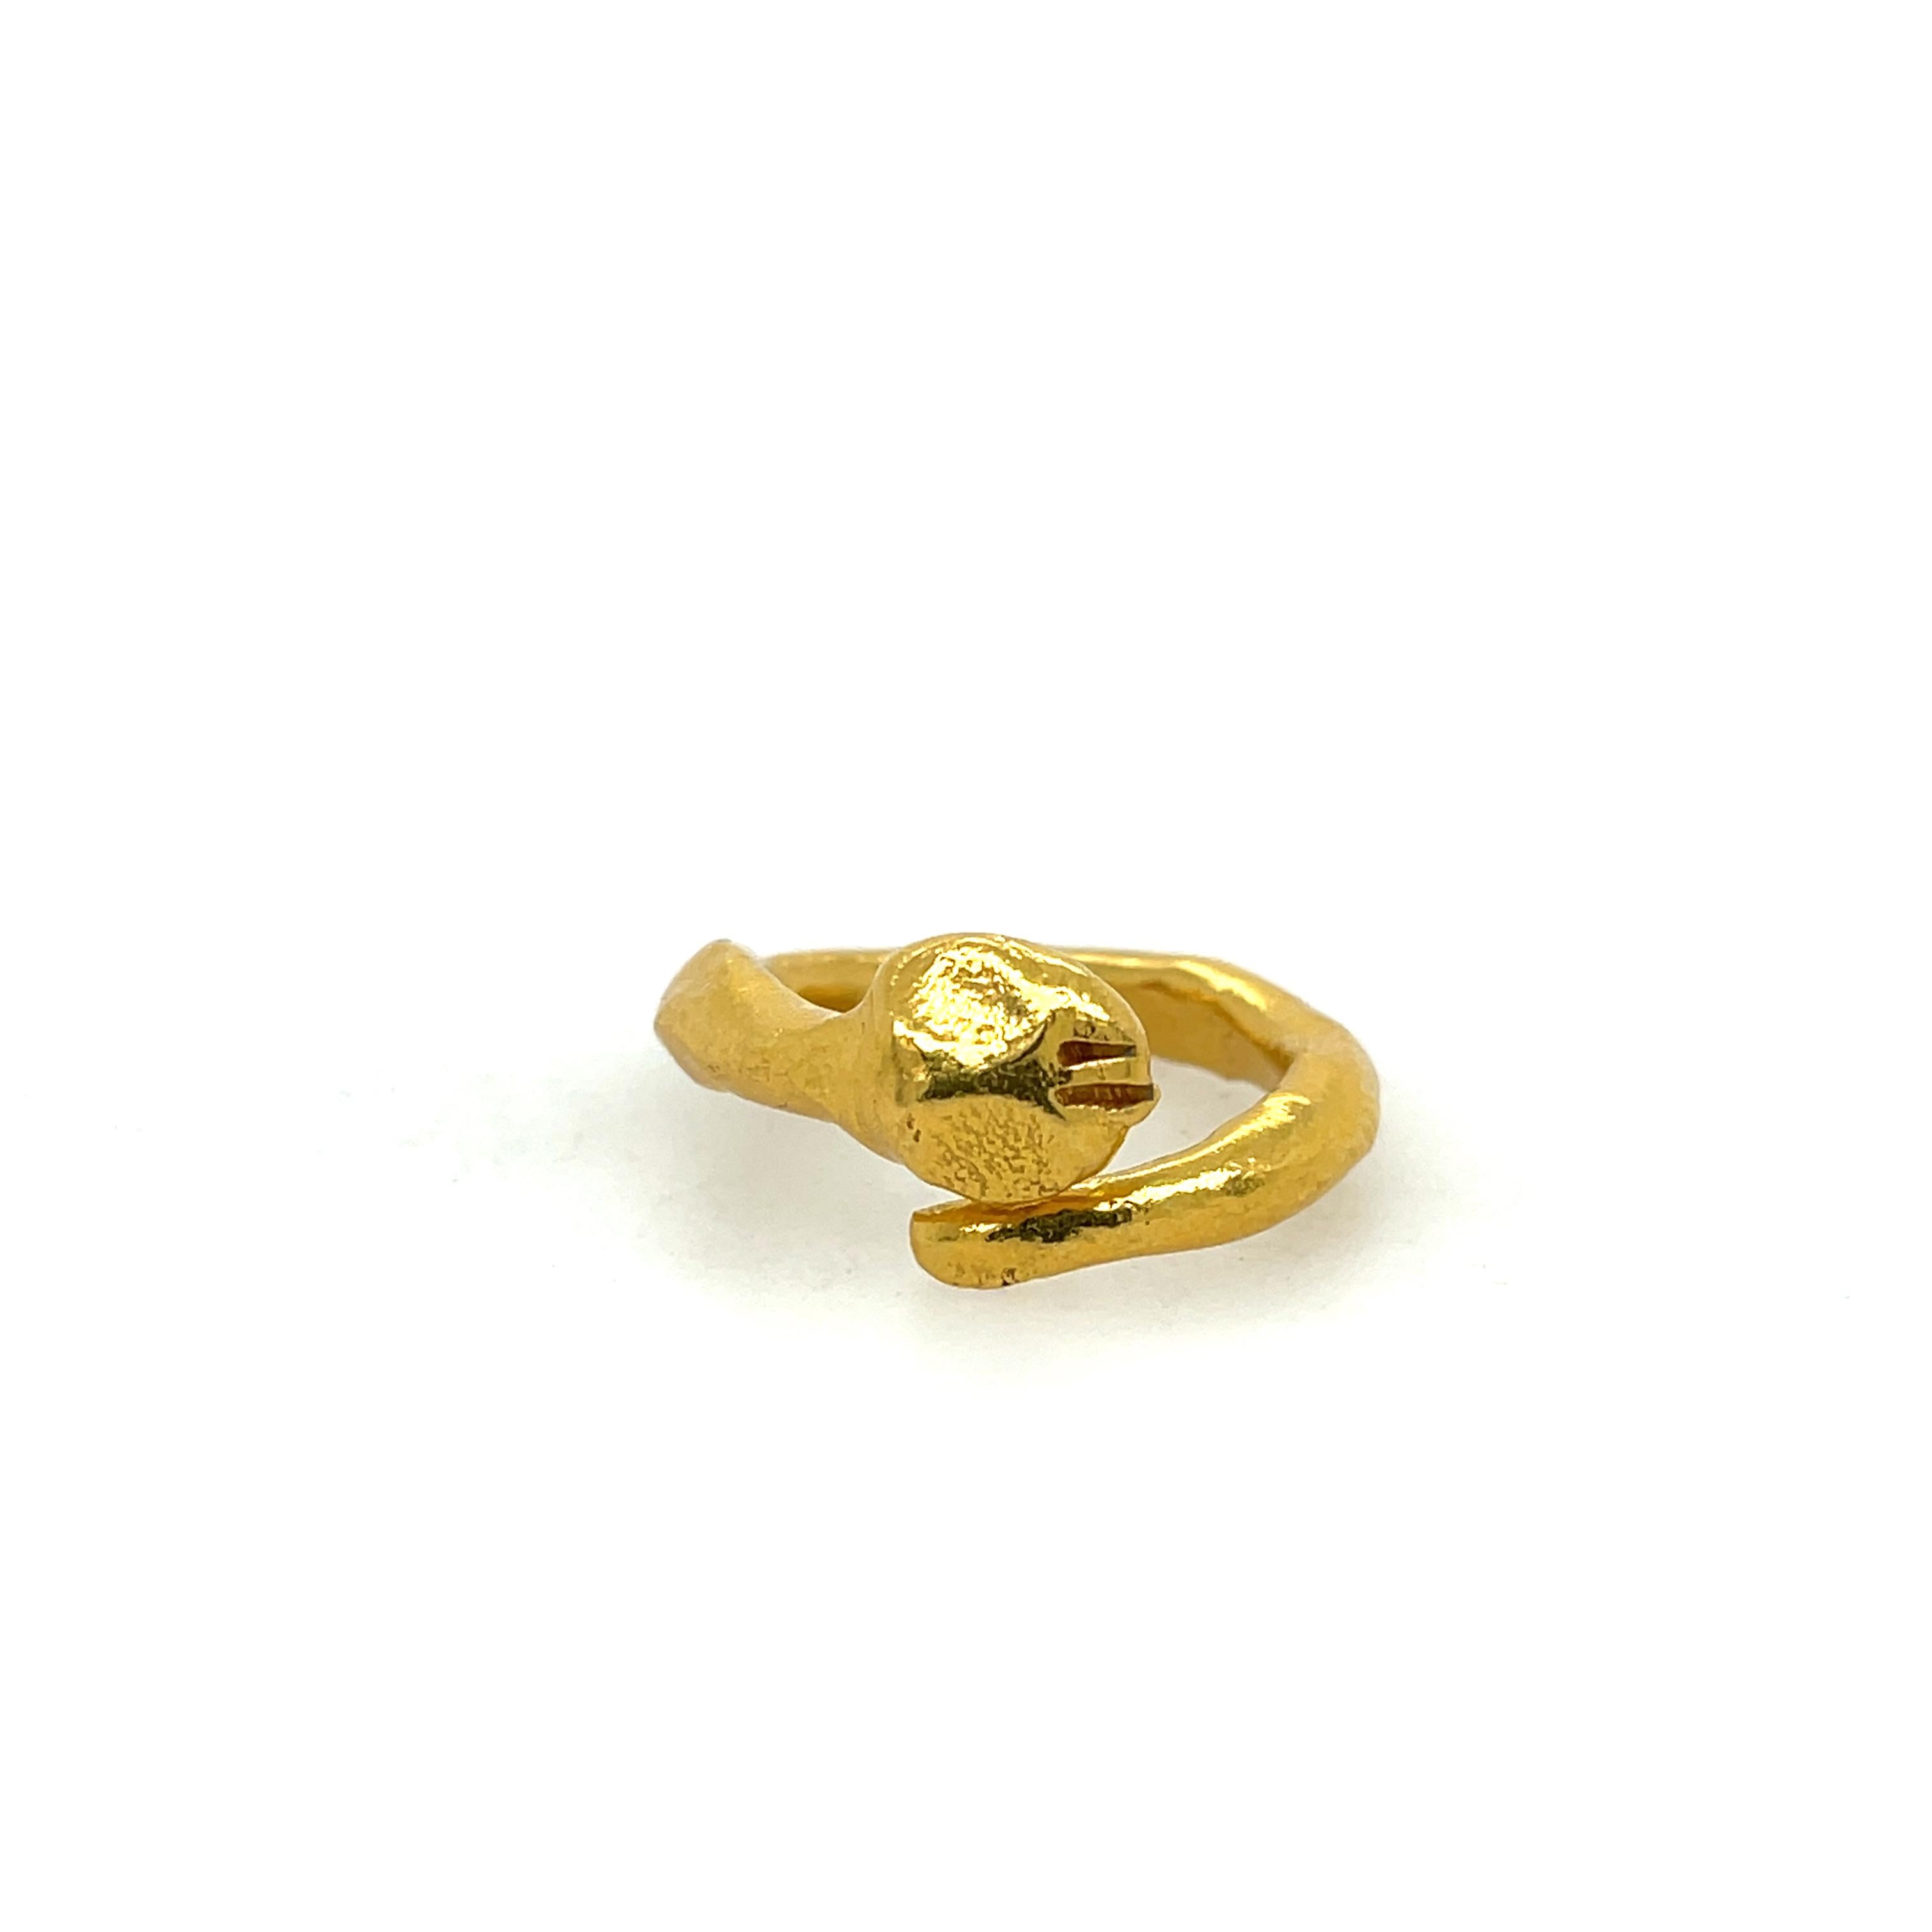 Estate Jean Mahie Snake Ring in 22K Yellow Gold. Ring size 5.25
12.4 Grams
3.49mm Wide